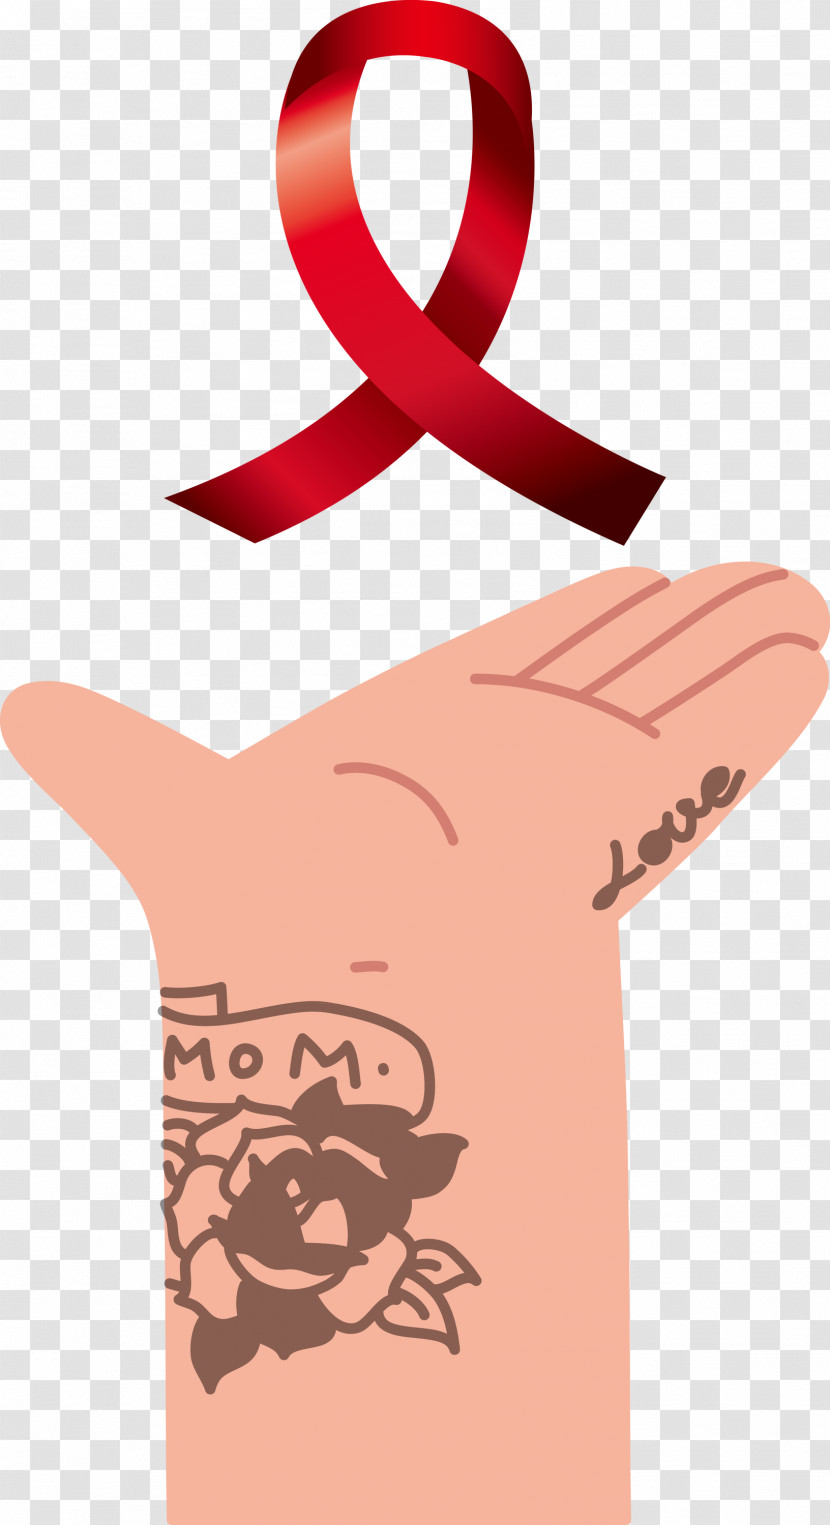 World AIDS Day Transparent PNG